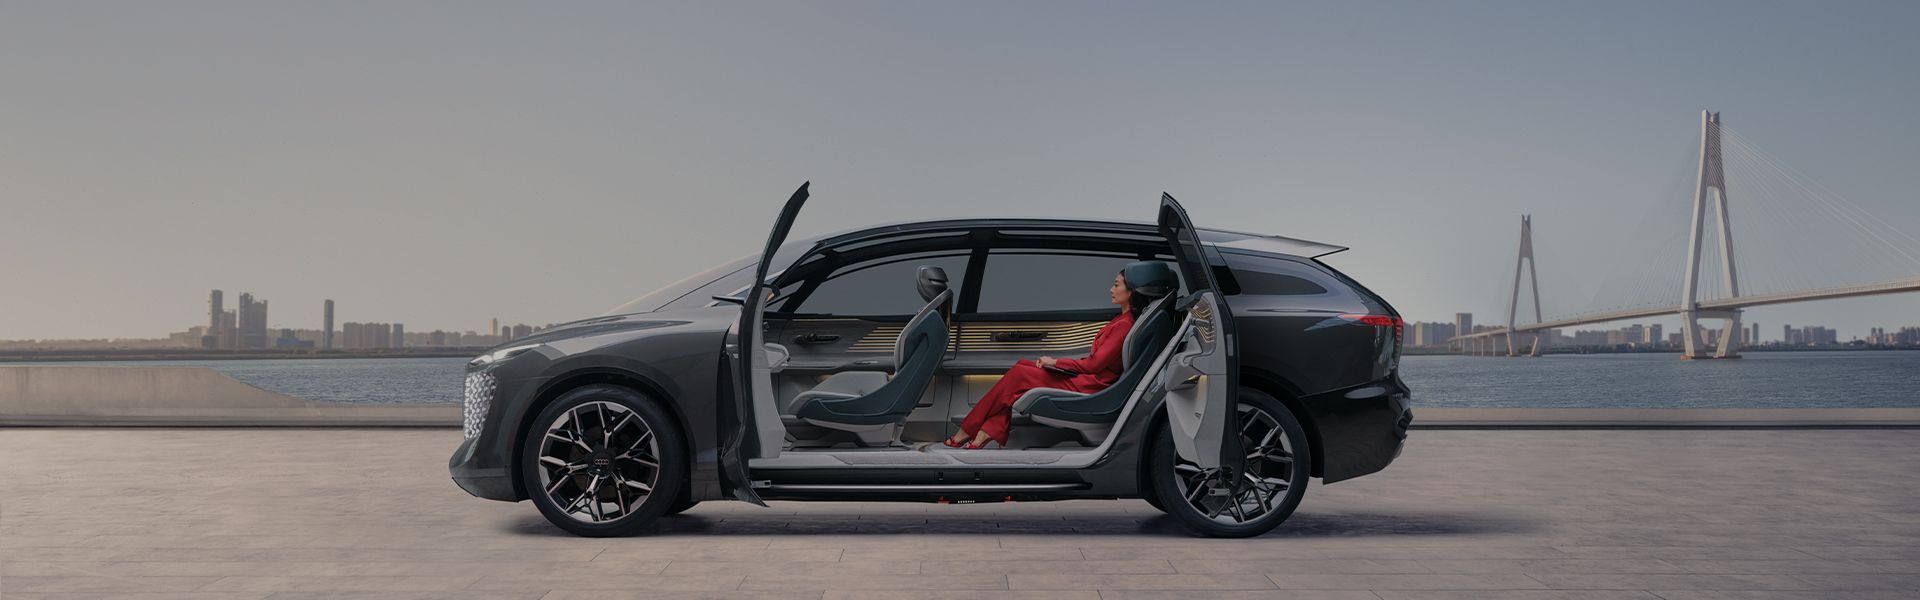 The open doors reveal the interior of the Audi urbansphere concept.